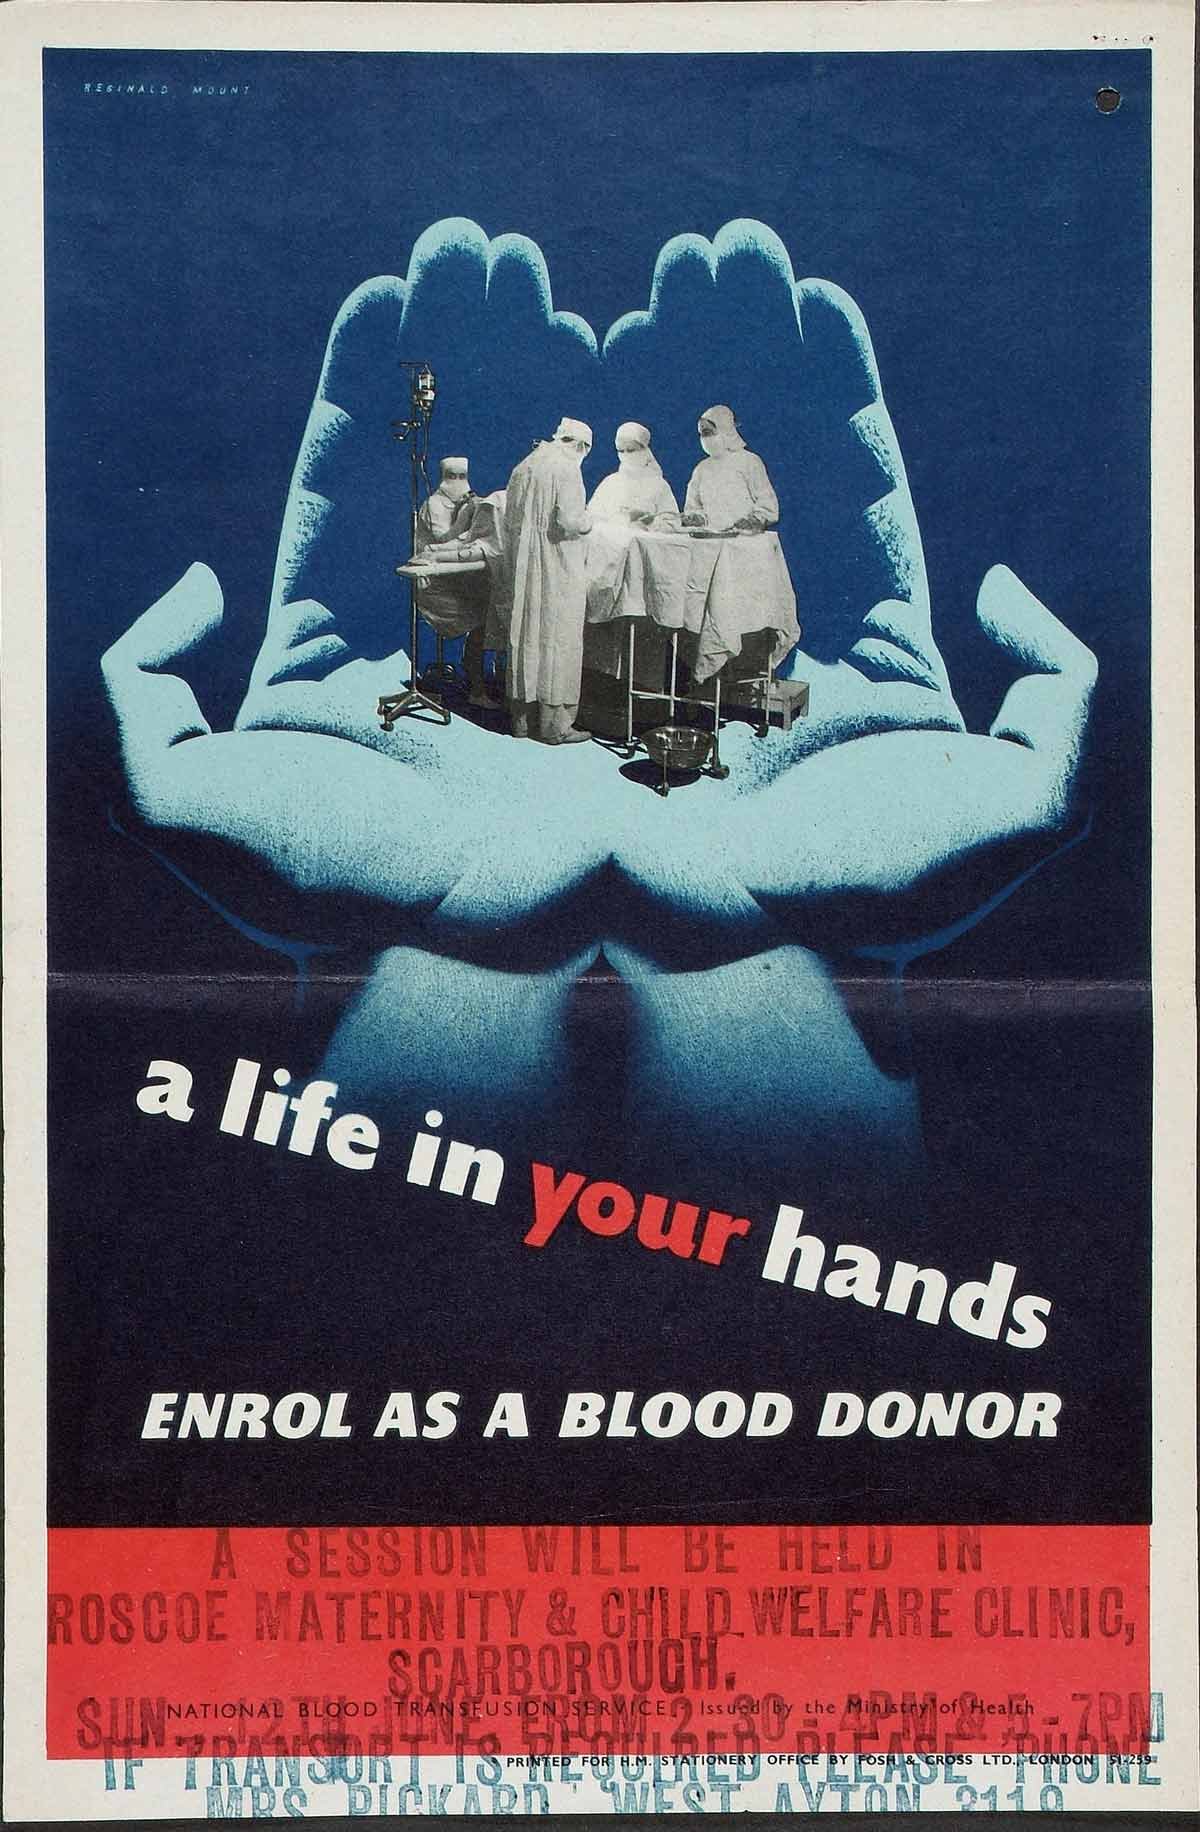 Surgeons operate on a patient within a huge pair of hands above the words 'a life in your hands'.